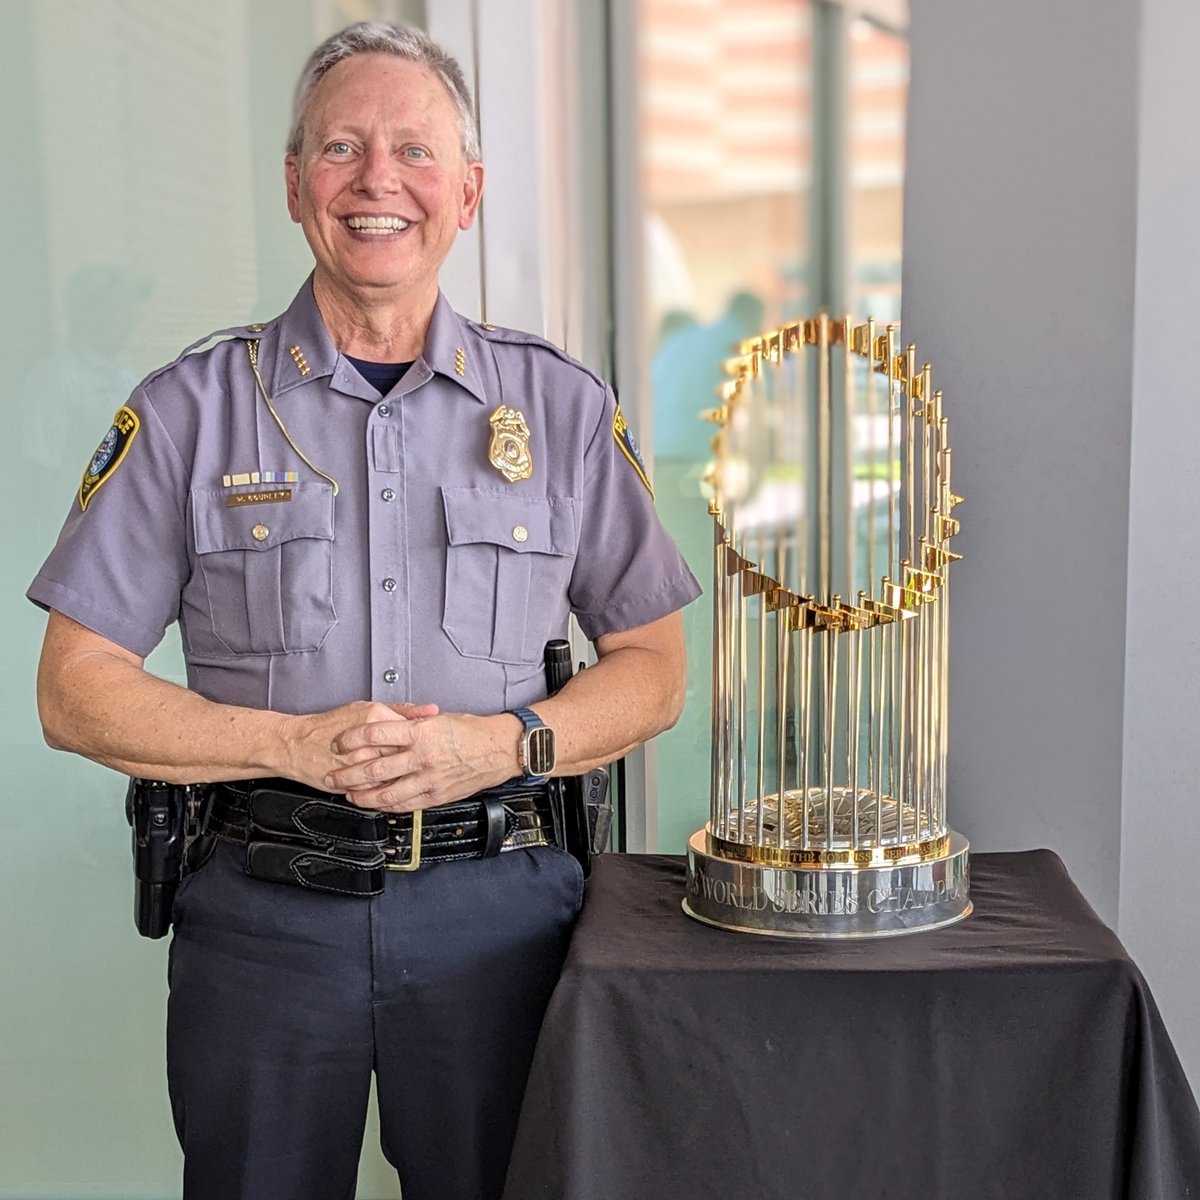 The 2023 @MLB World Champions Trophy Tour stopped by headquarters today. The trophy belongs to the Texas @Rangers...pretty cool stuff.